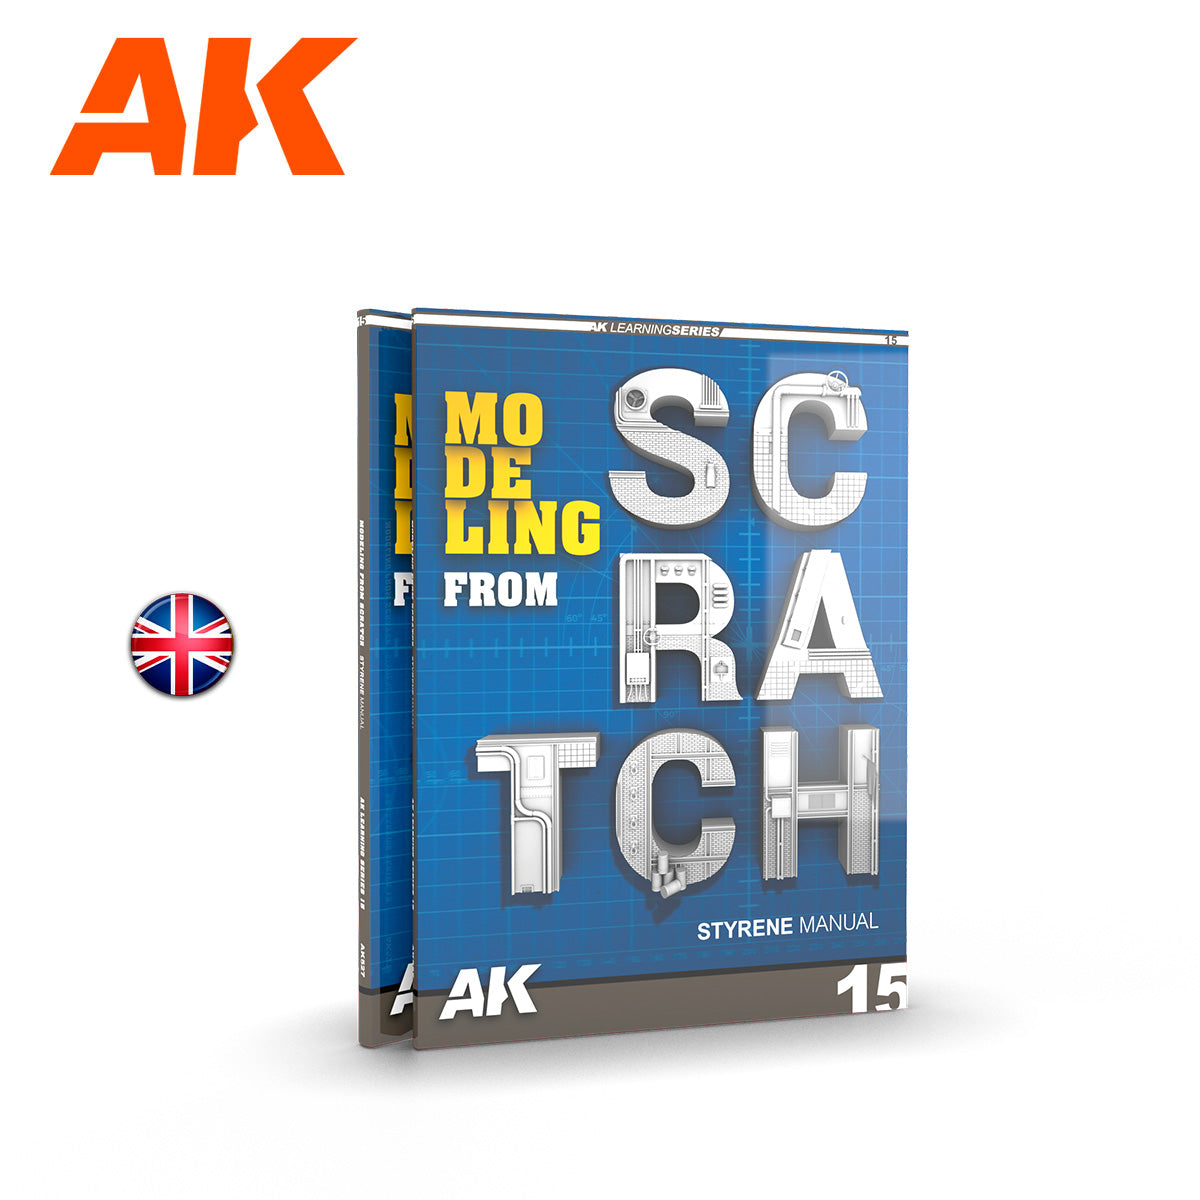 AK Interactive AK527 AK Learning 15: Modeling From Scratch COMING SOON